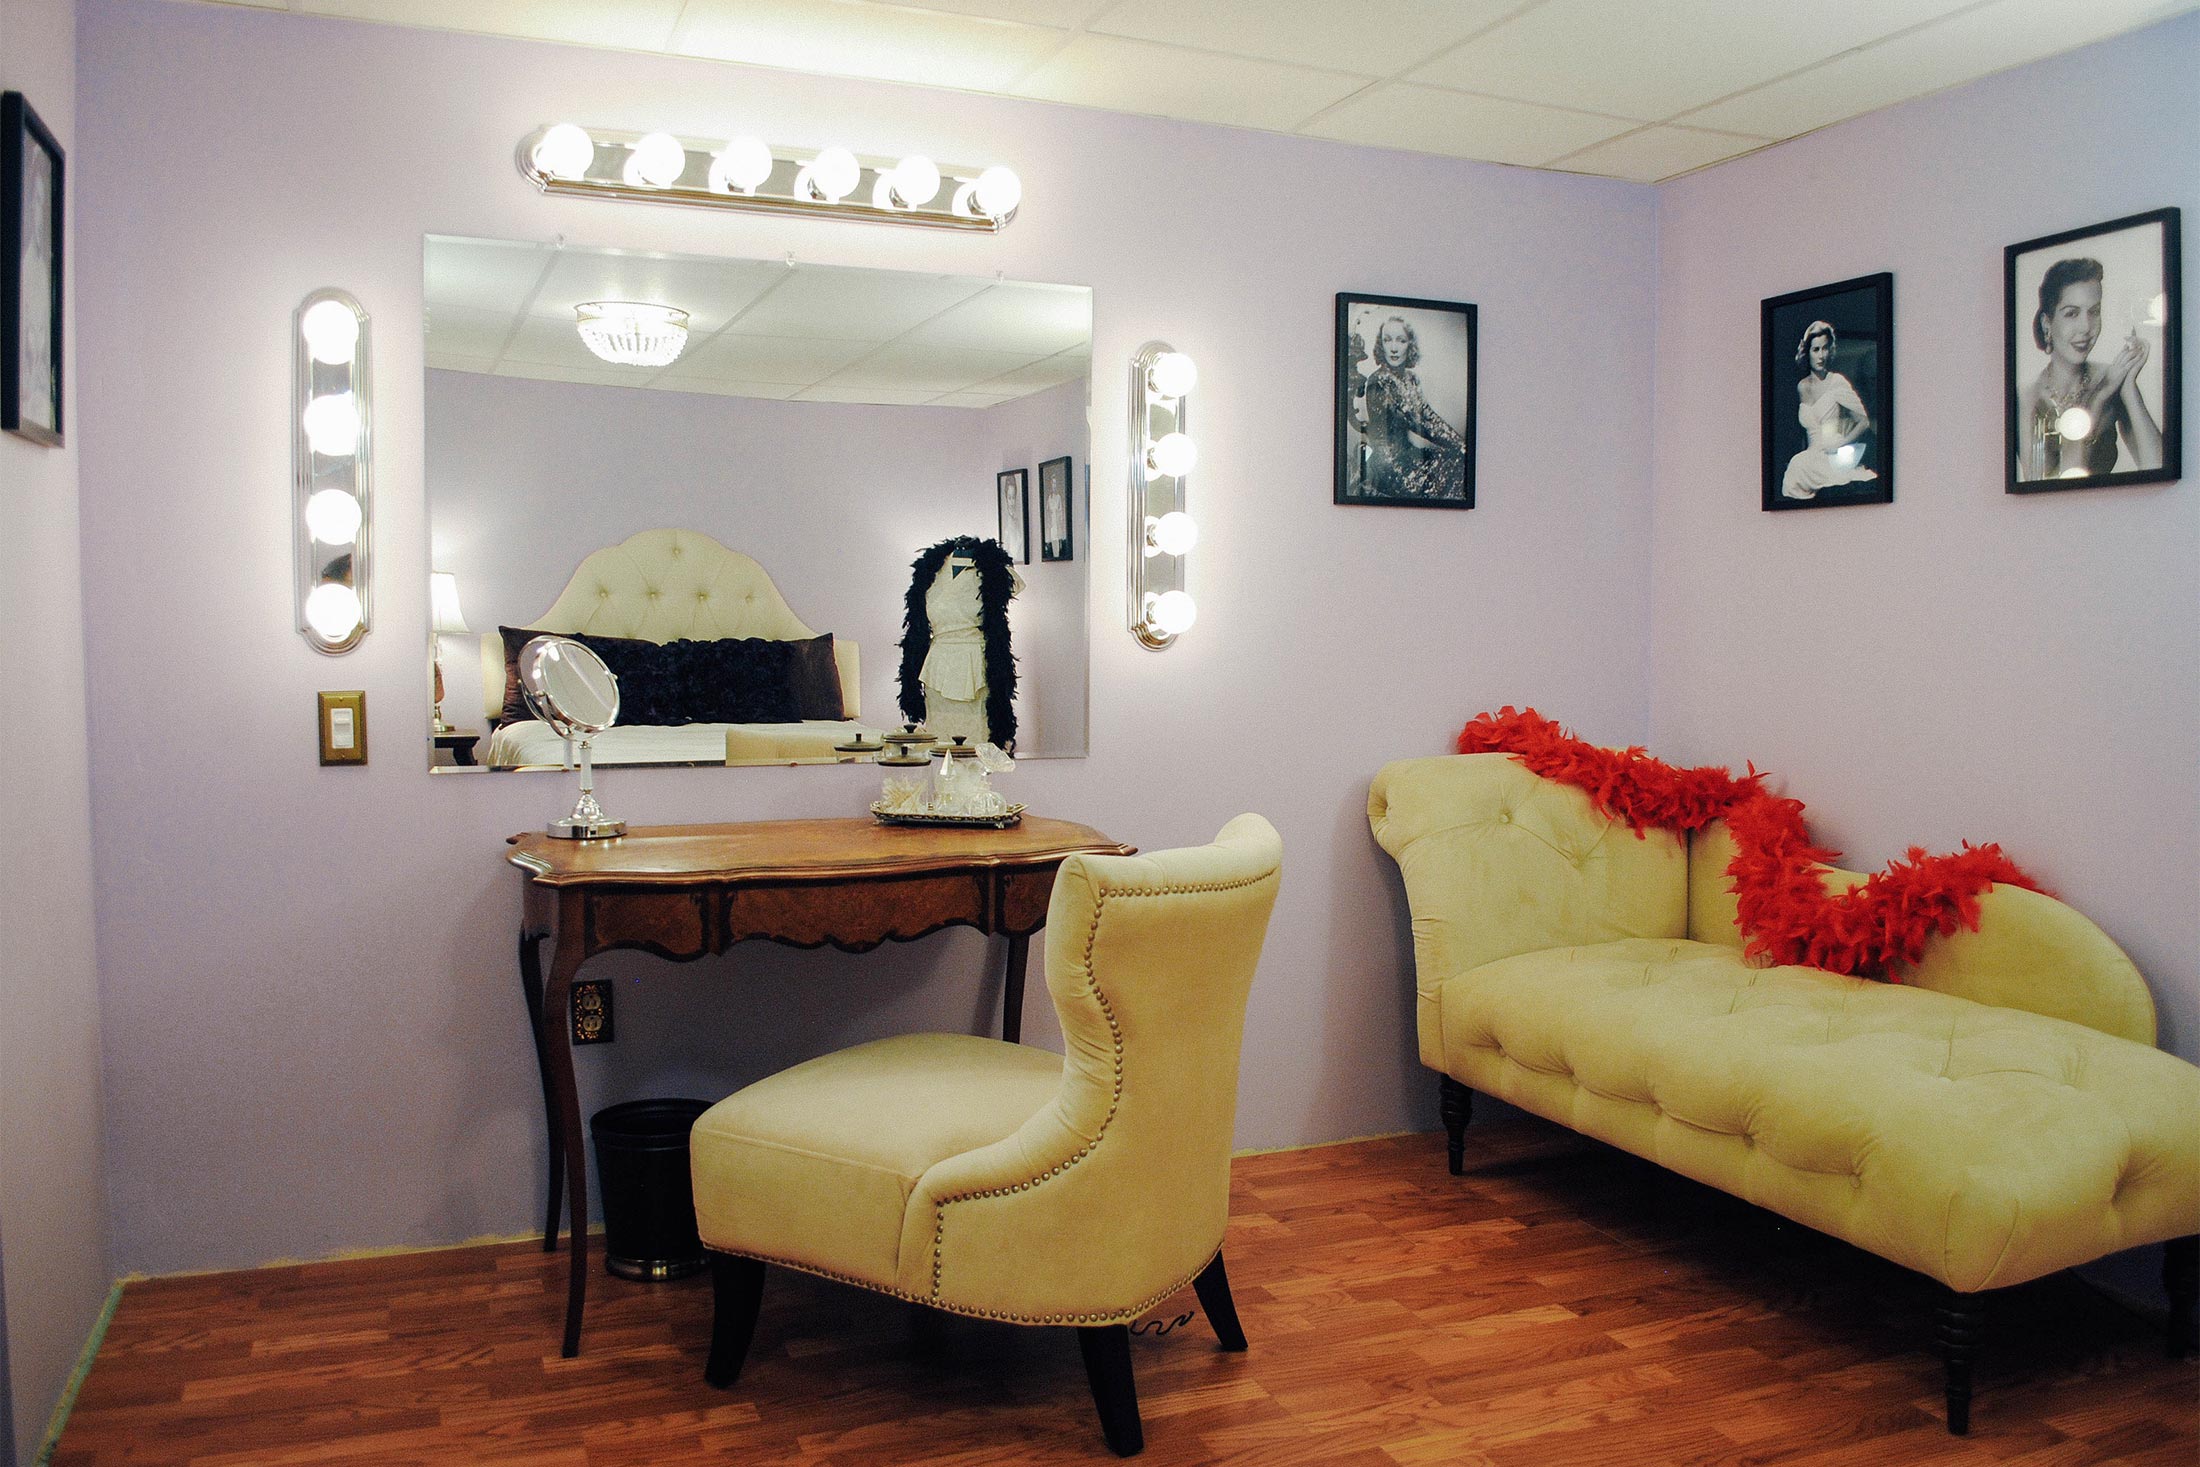 A lavender room with a vanity surrounded by globe lights, and a chaise draped in a red feather boa.